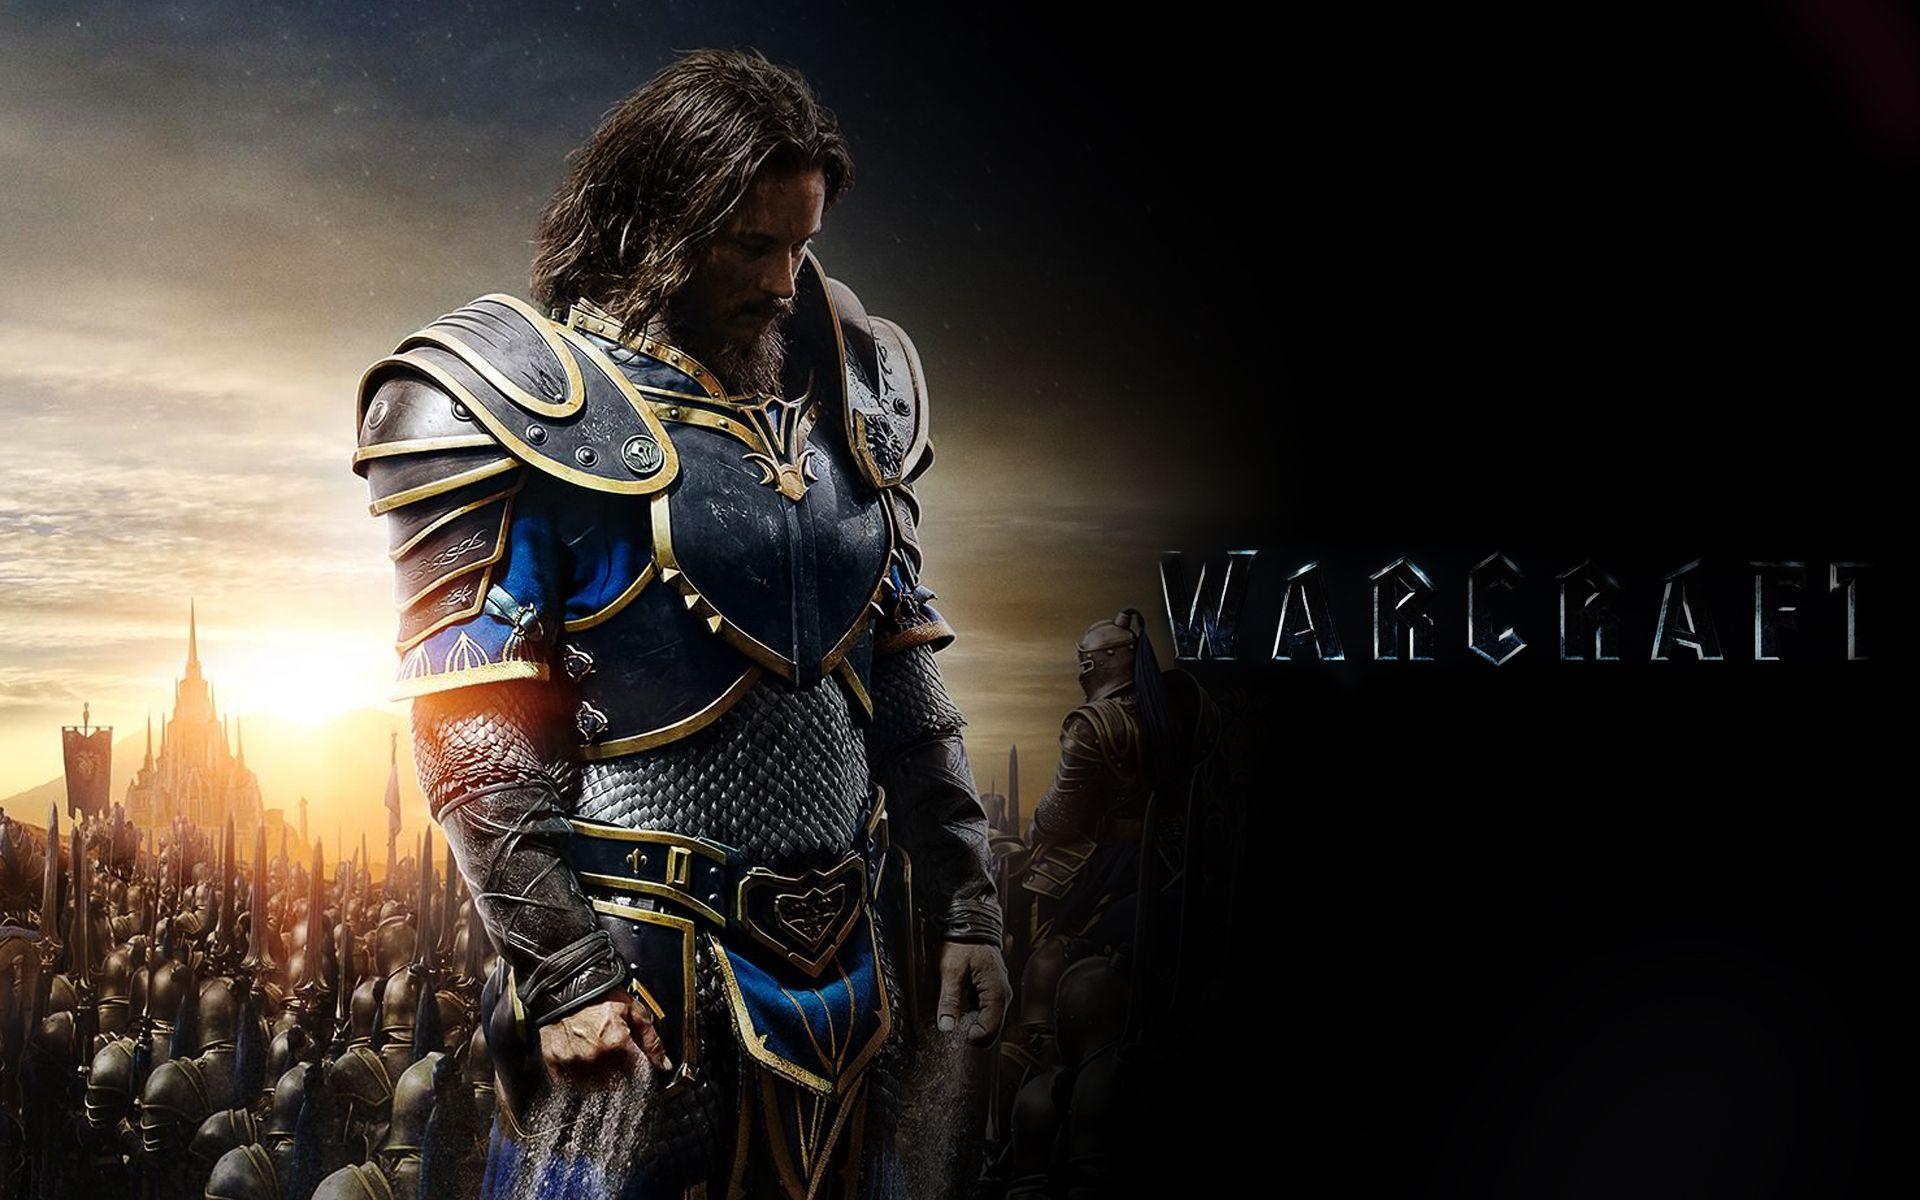 Warcraft Movie Anduin Lothar wallpaper 2018 in Movies